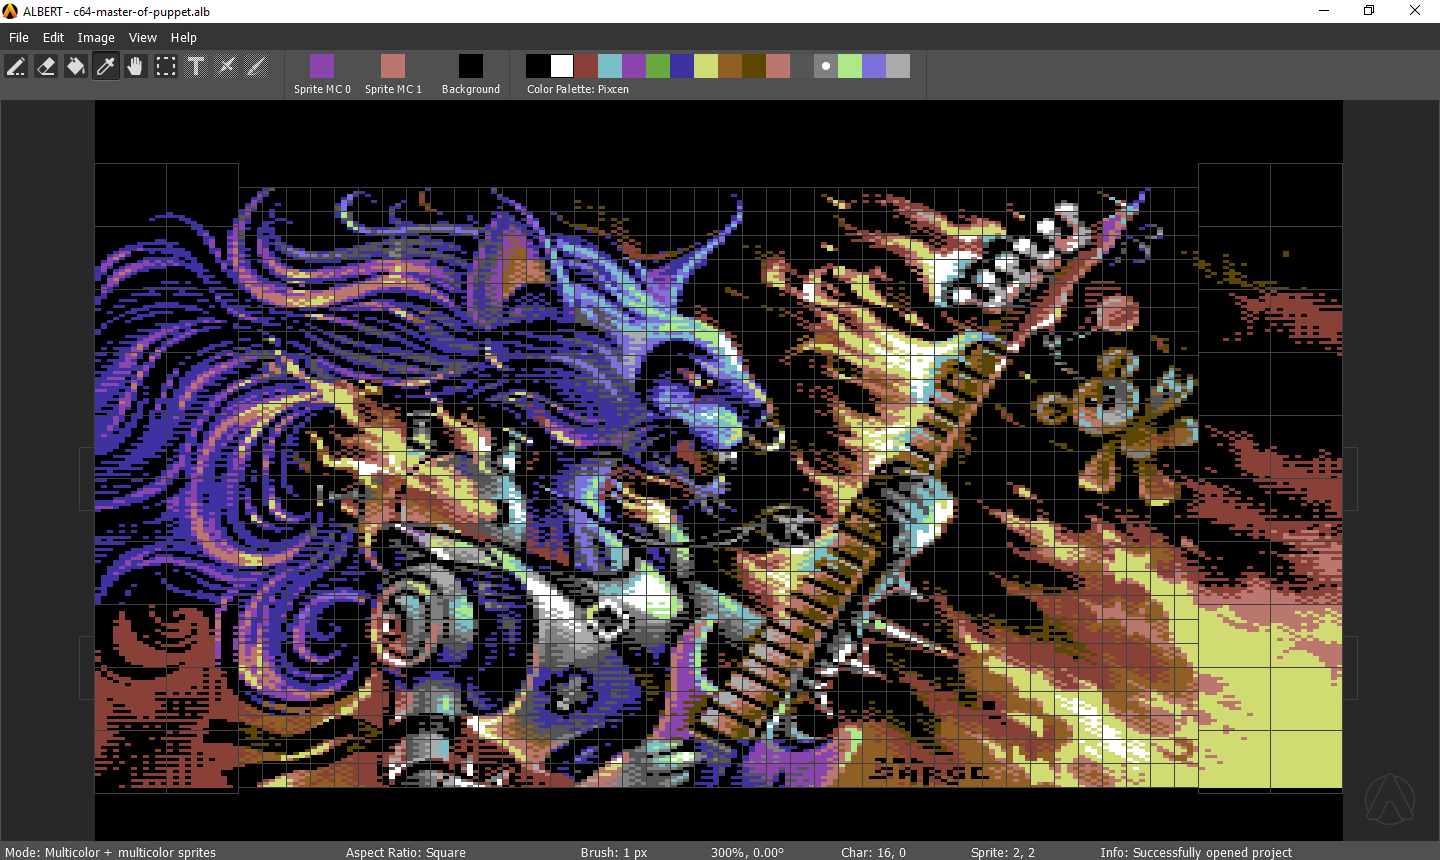 ALBERT: the pixel art editor for extended Commodore 64 images by Luigi Di Fraia